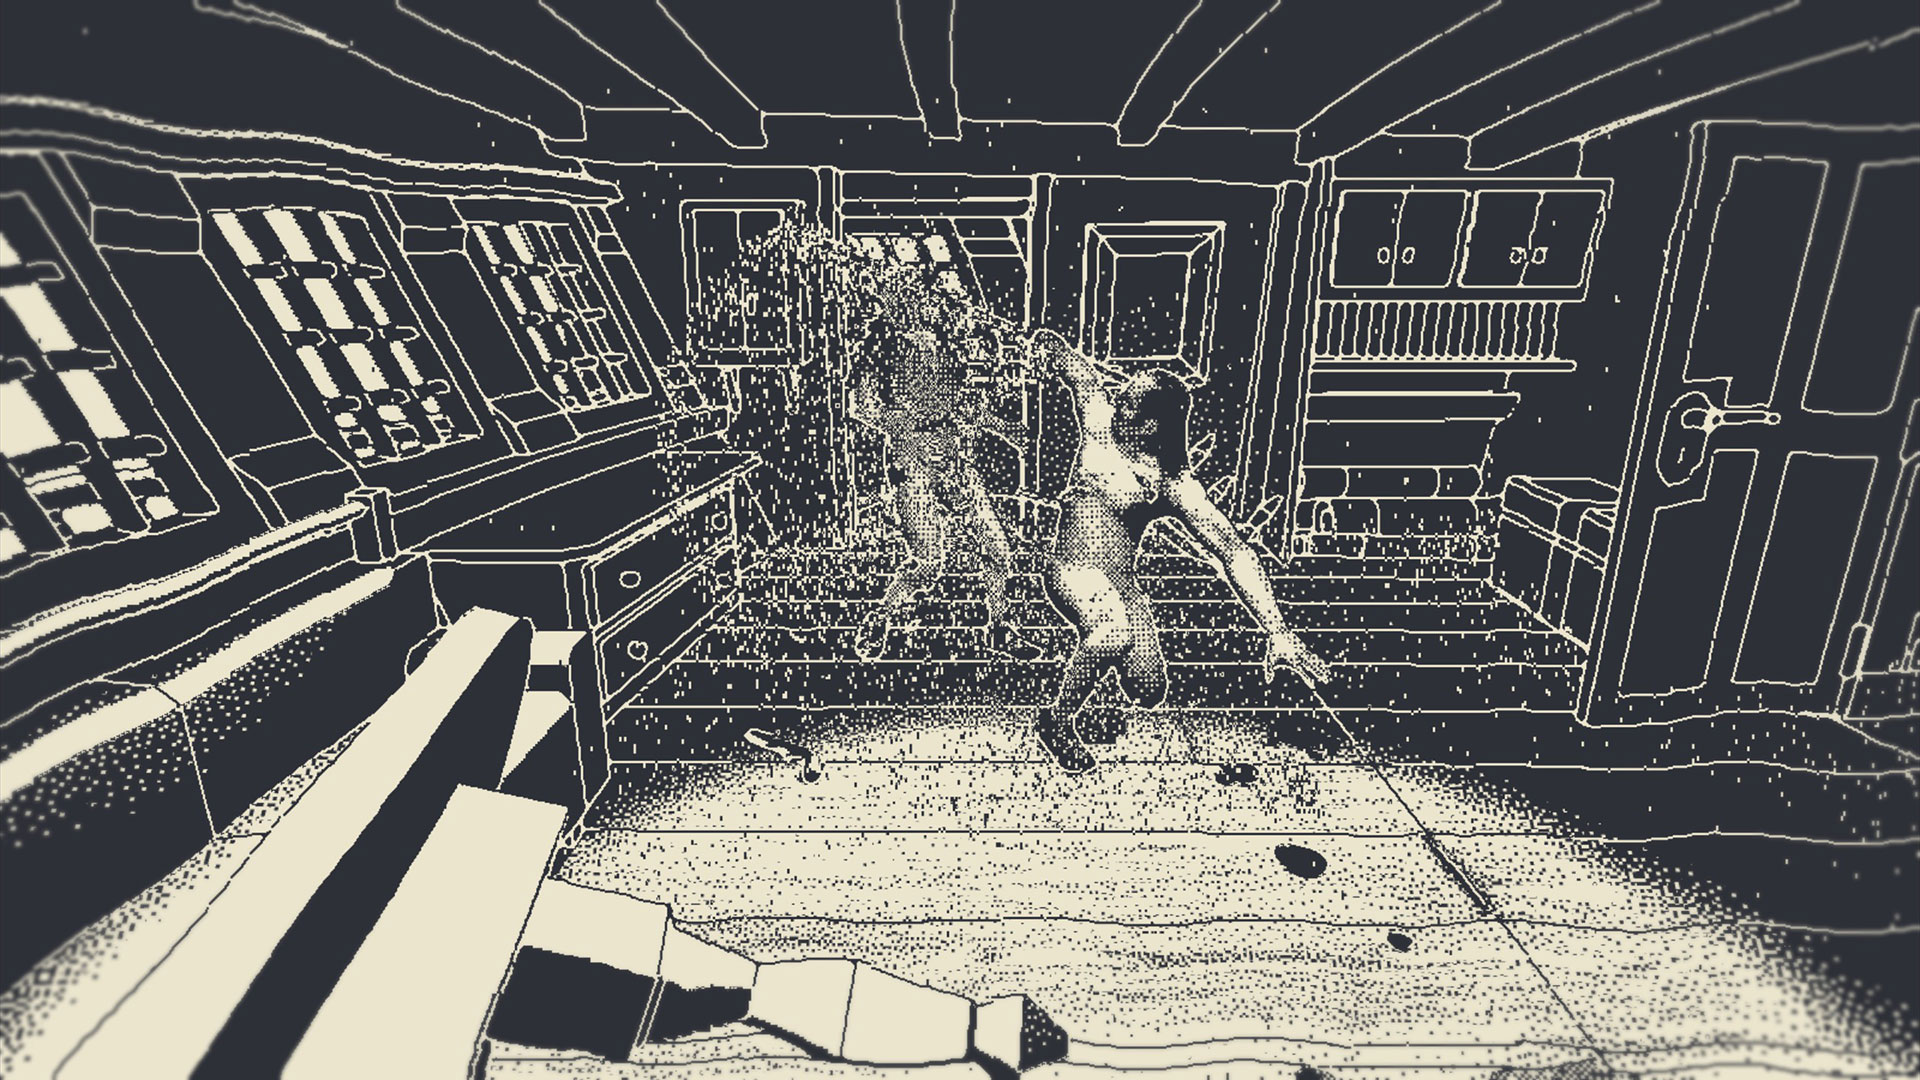 My Favorite Games to Play on the Steam Deck - Return of the Obra Dinn